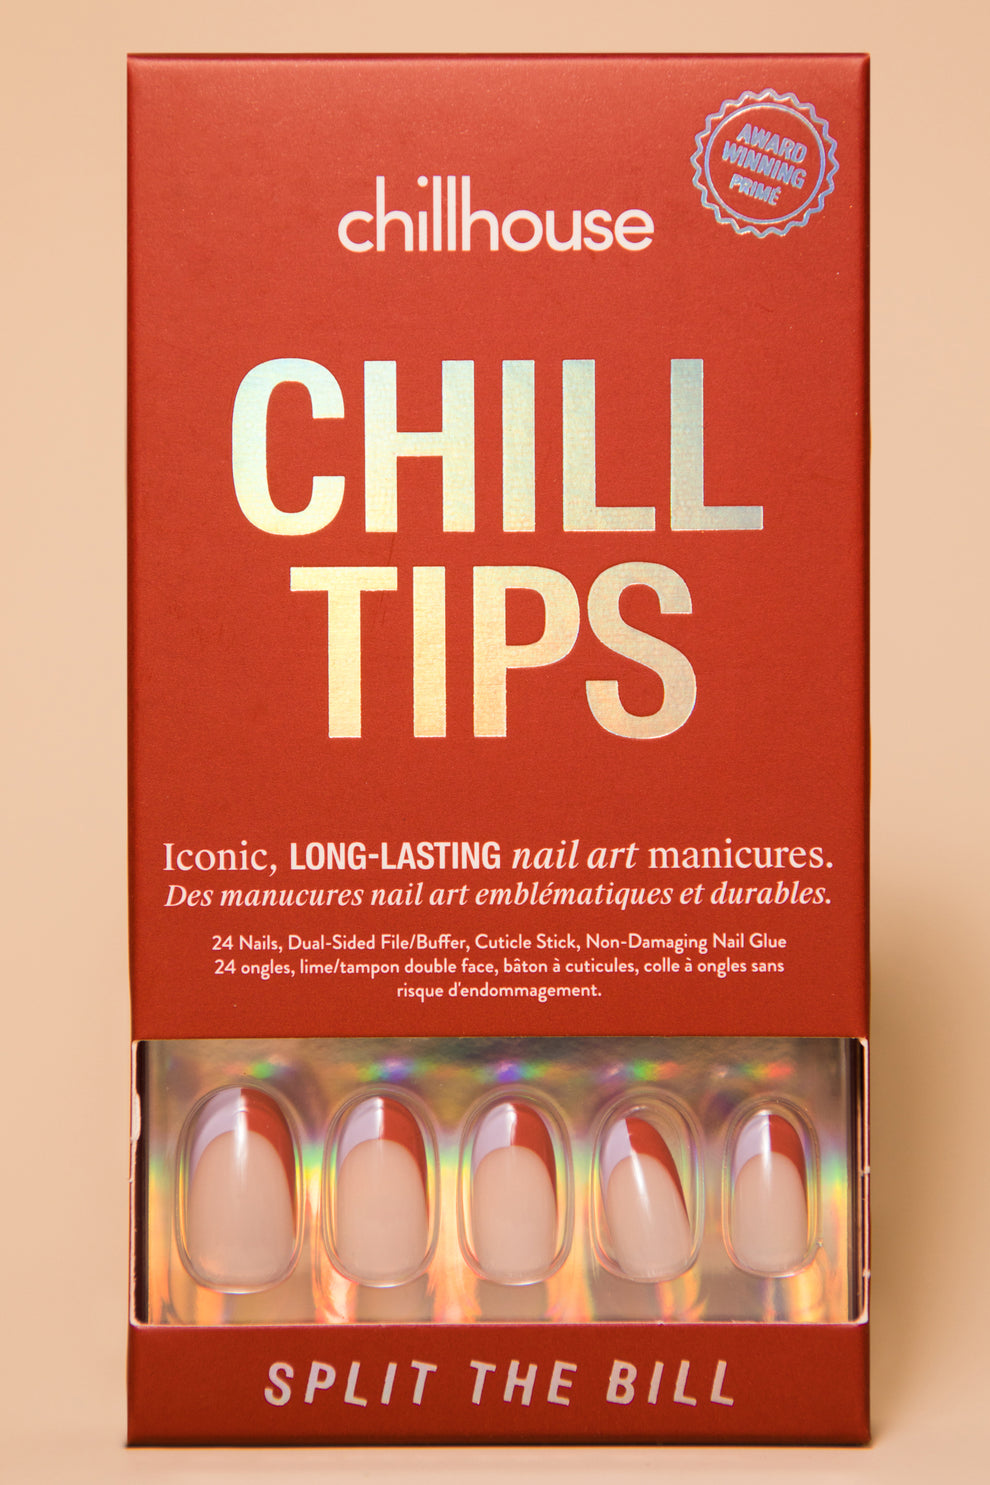 Chill Tips - Split The Bill by Chillhouse